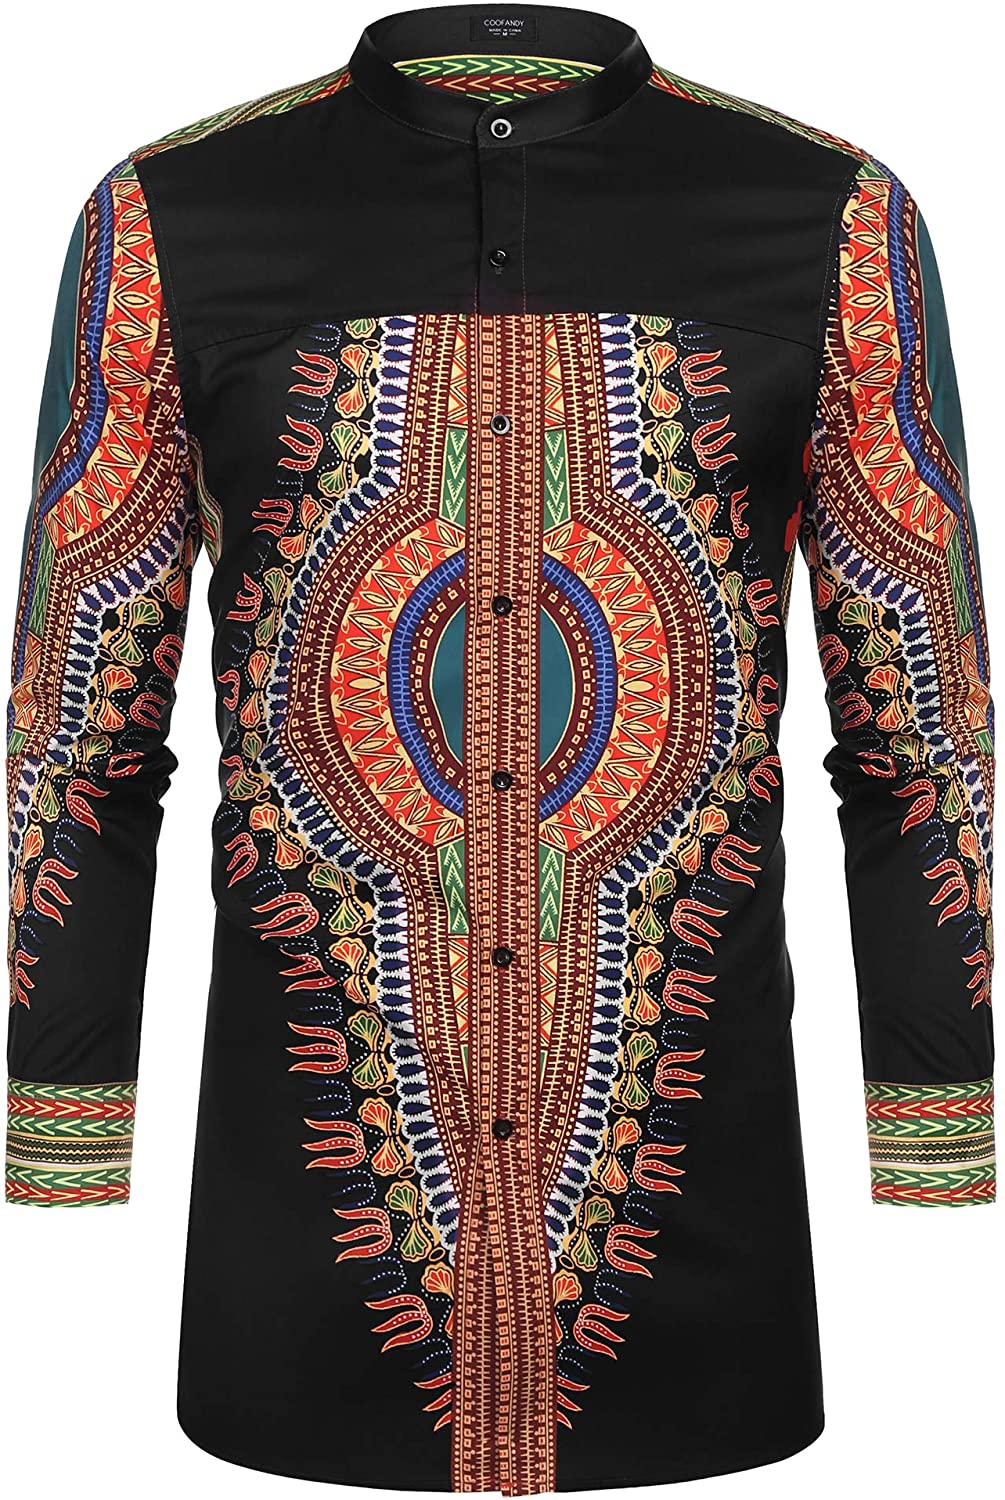 Zimaes-Men Floral Print Long Sleeve African Buttoned Dashiki T-Shirts 